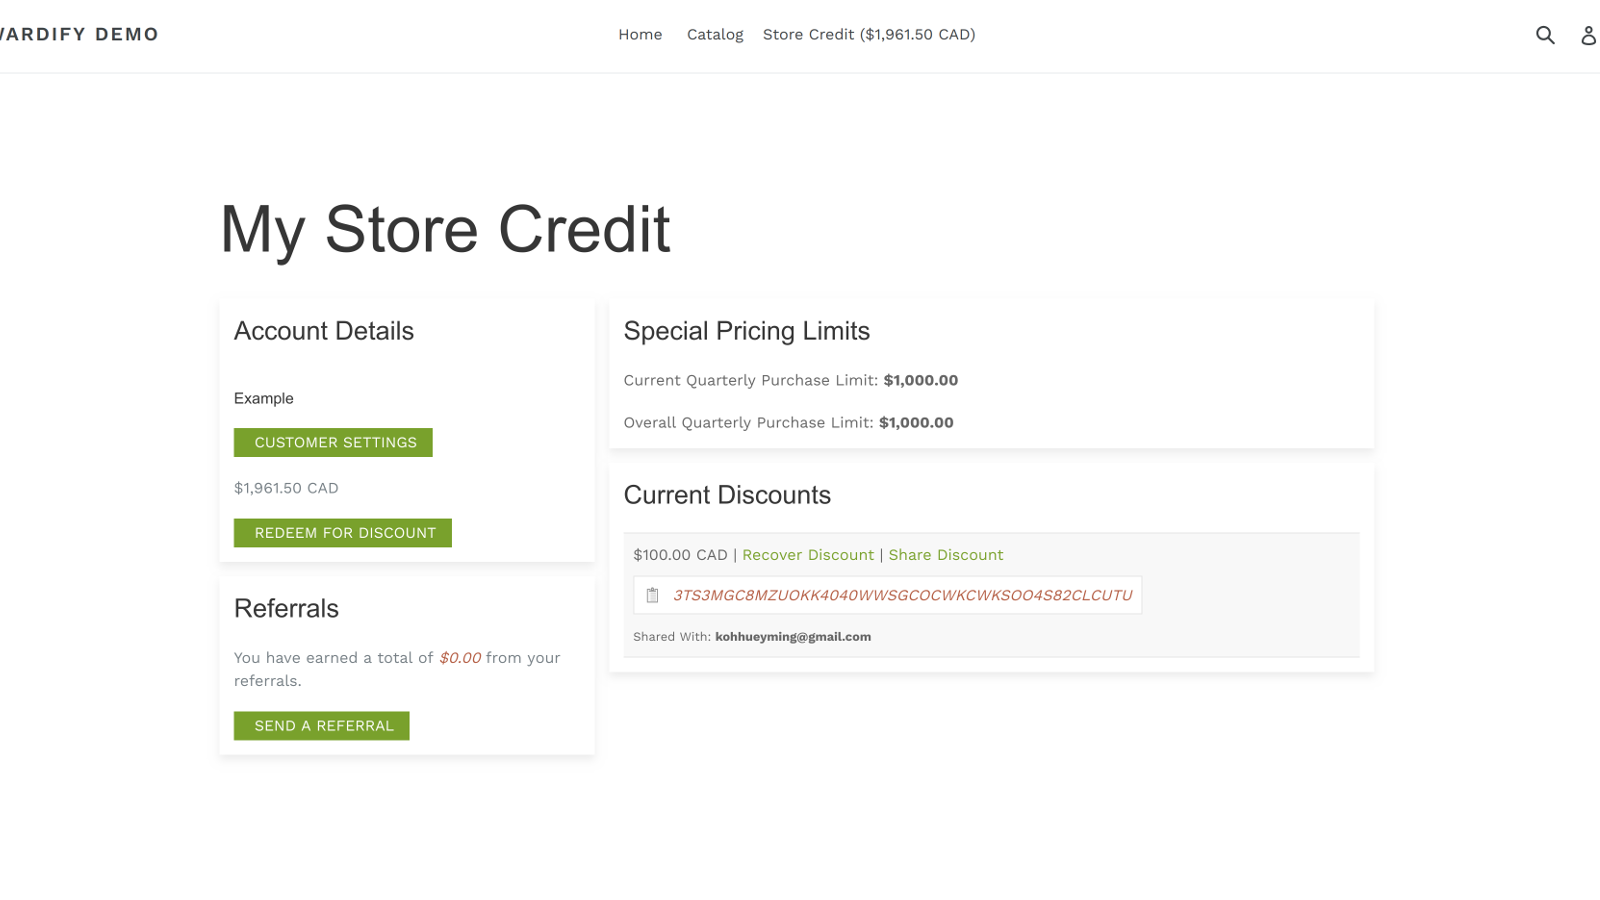 My Store Credit Page